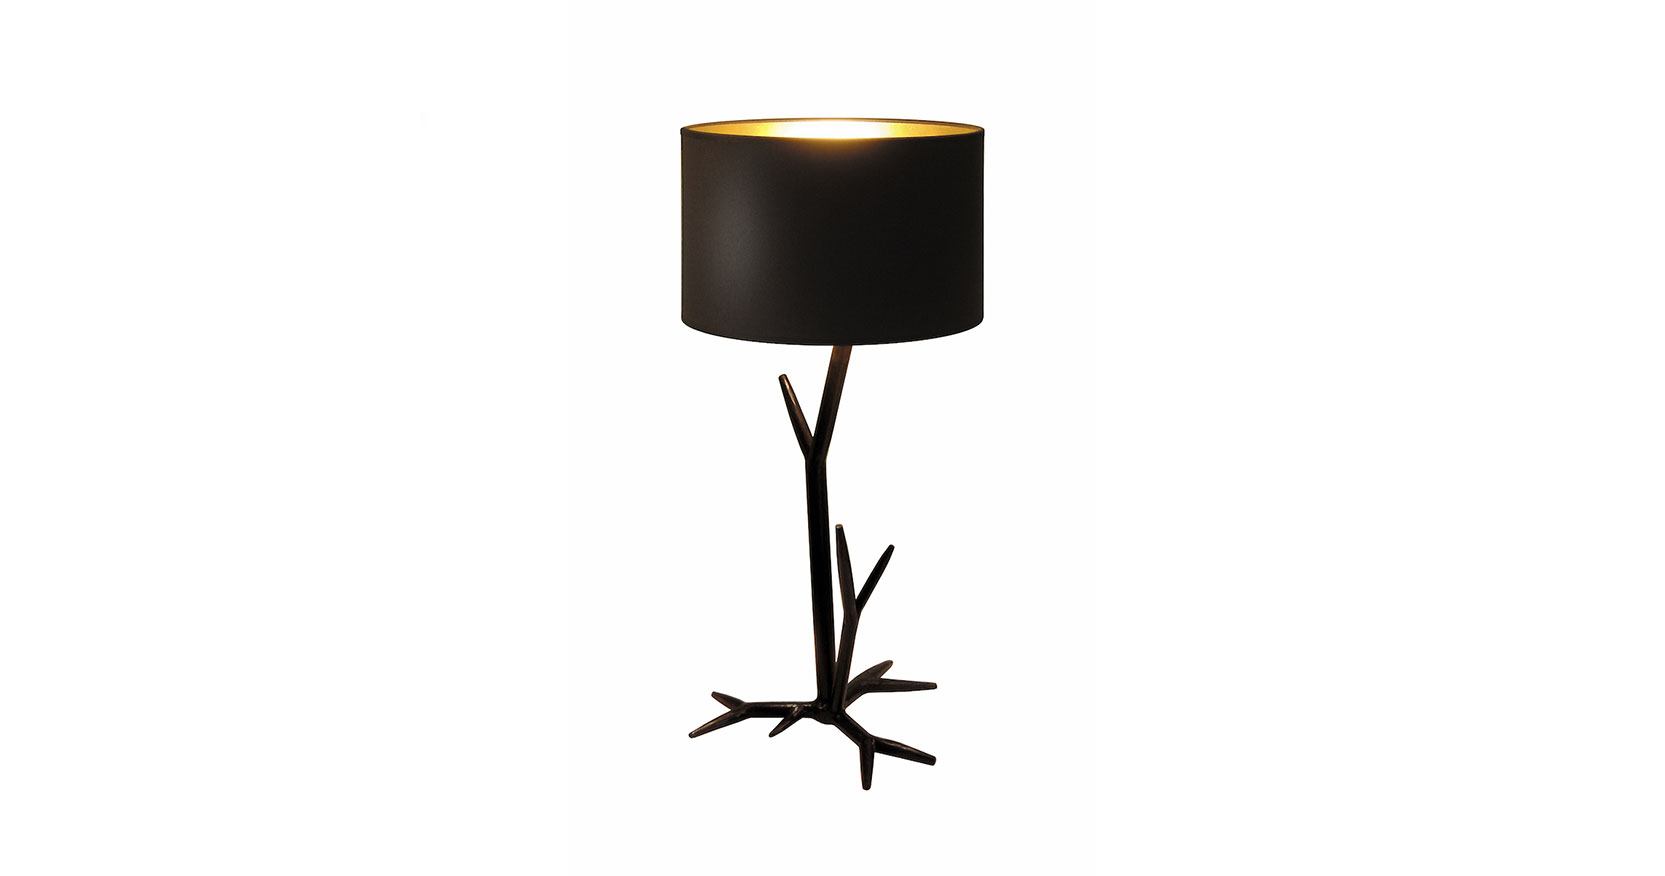 Eric Robin sculpted iron lamp. Black patinated base representing the roots with a black patinated iron central stem supporting a lampshade with a shiny gold interior and black exterior.